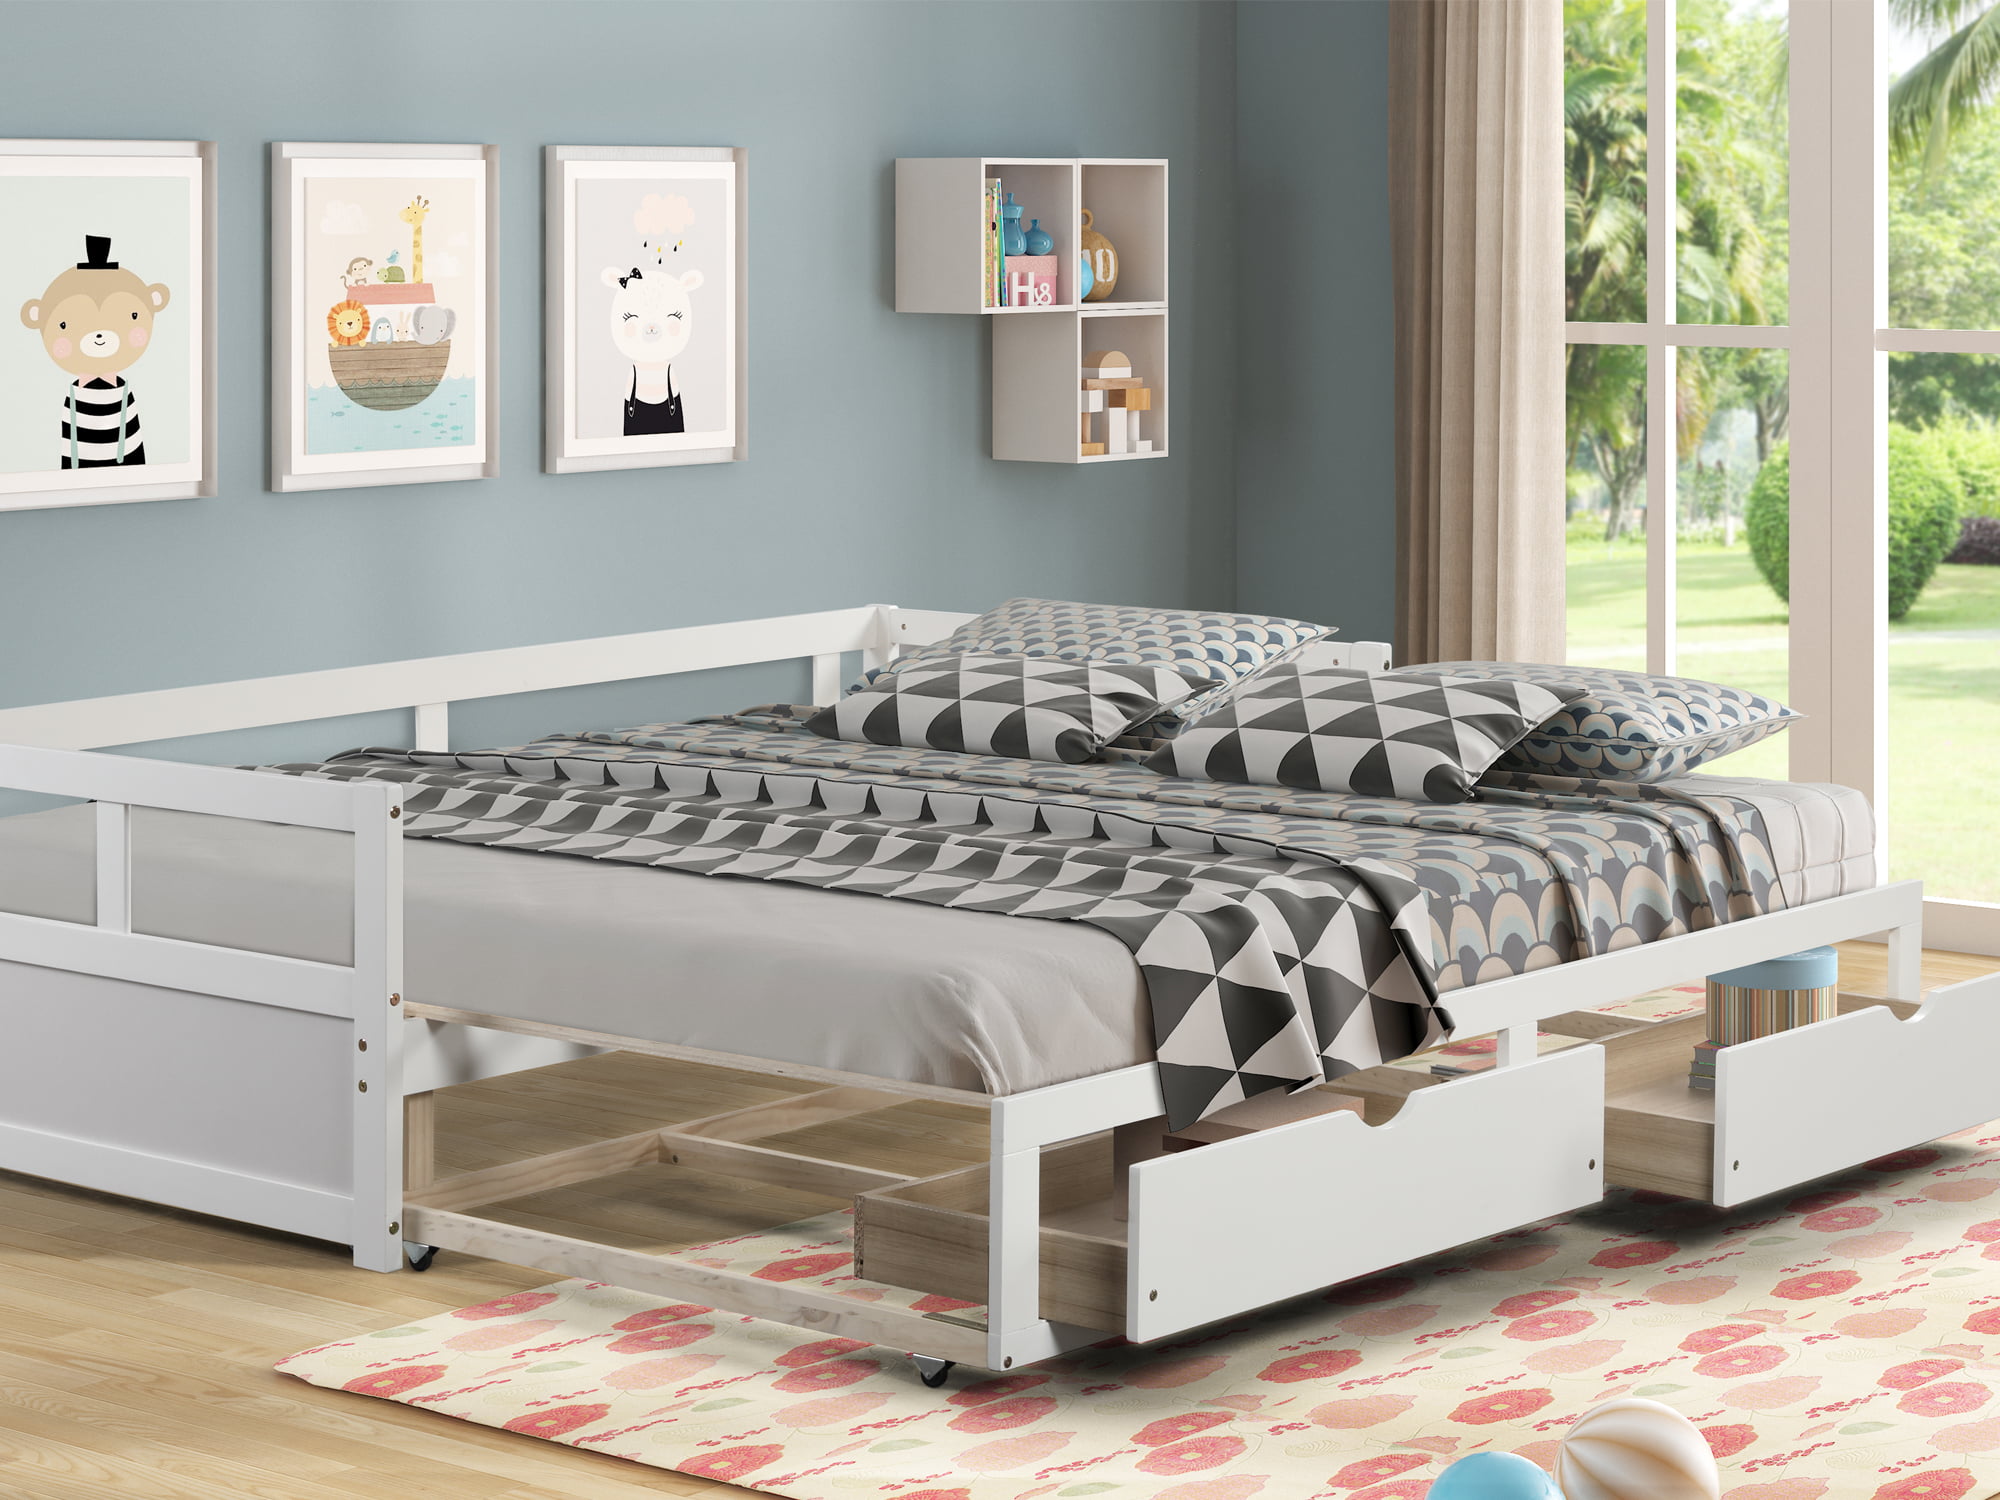 Wood Daybed With Storage Drawers And, Trundle Bed That Converts To King